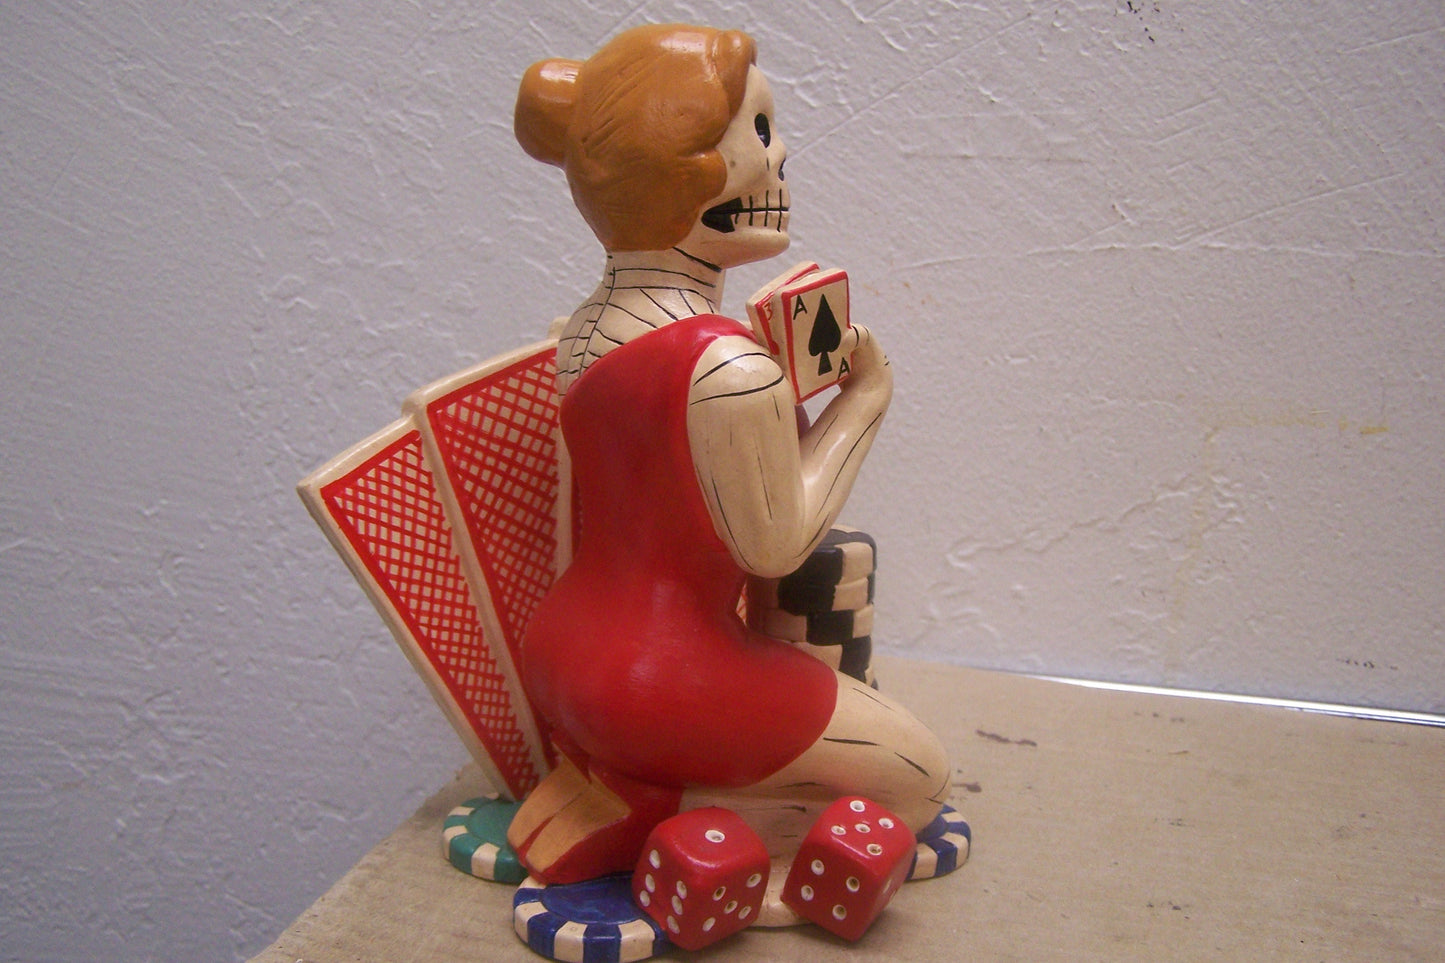 Day of the Dead Clay Skeleton "Lady Luck" Good Luck Figurine